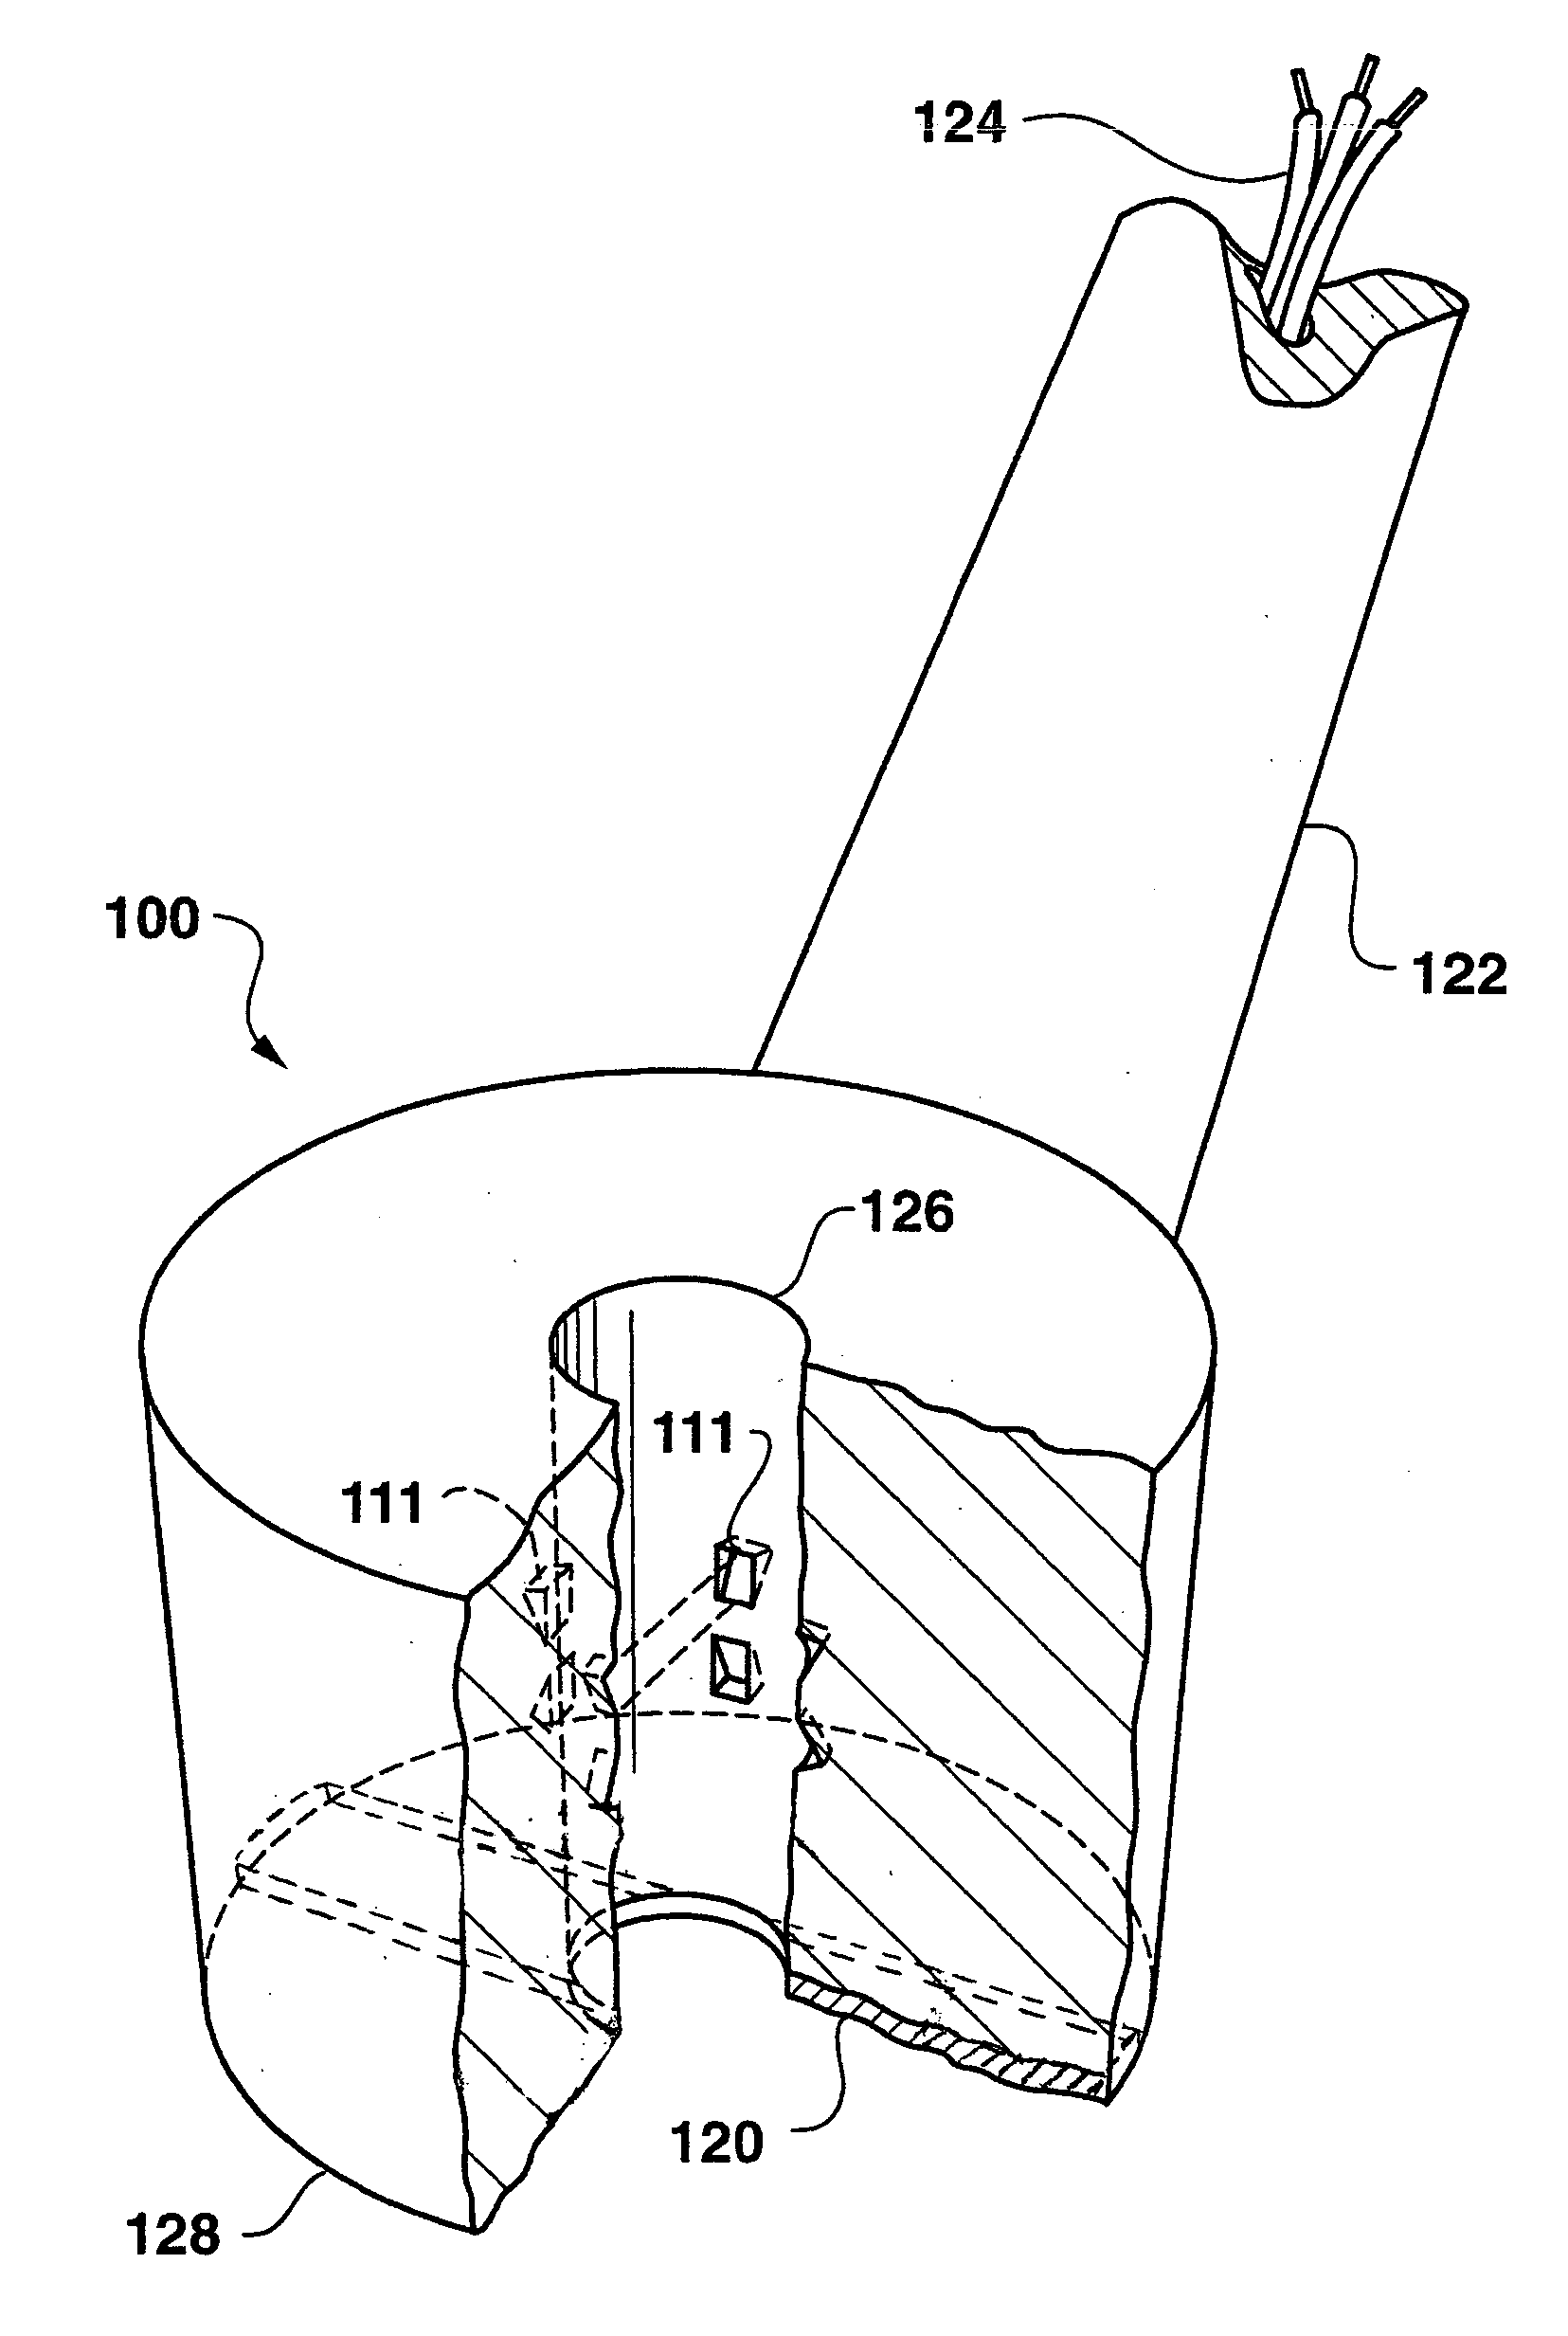 Ultrasound guided probe device and method of using same